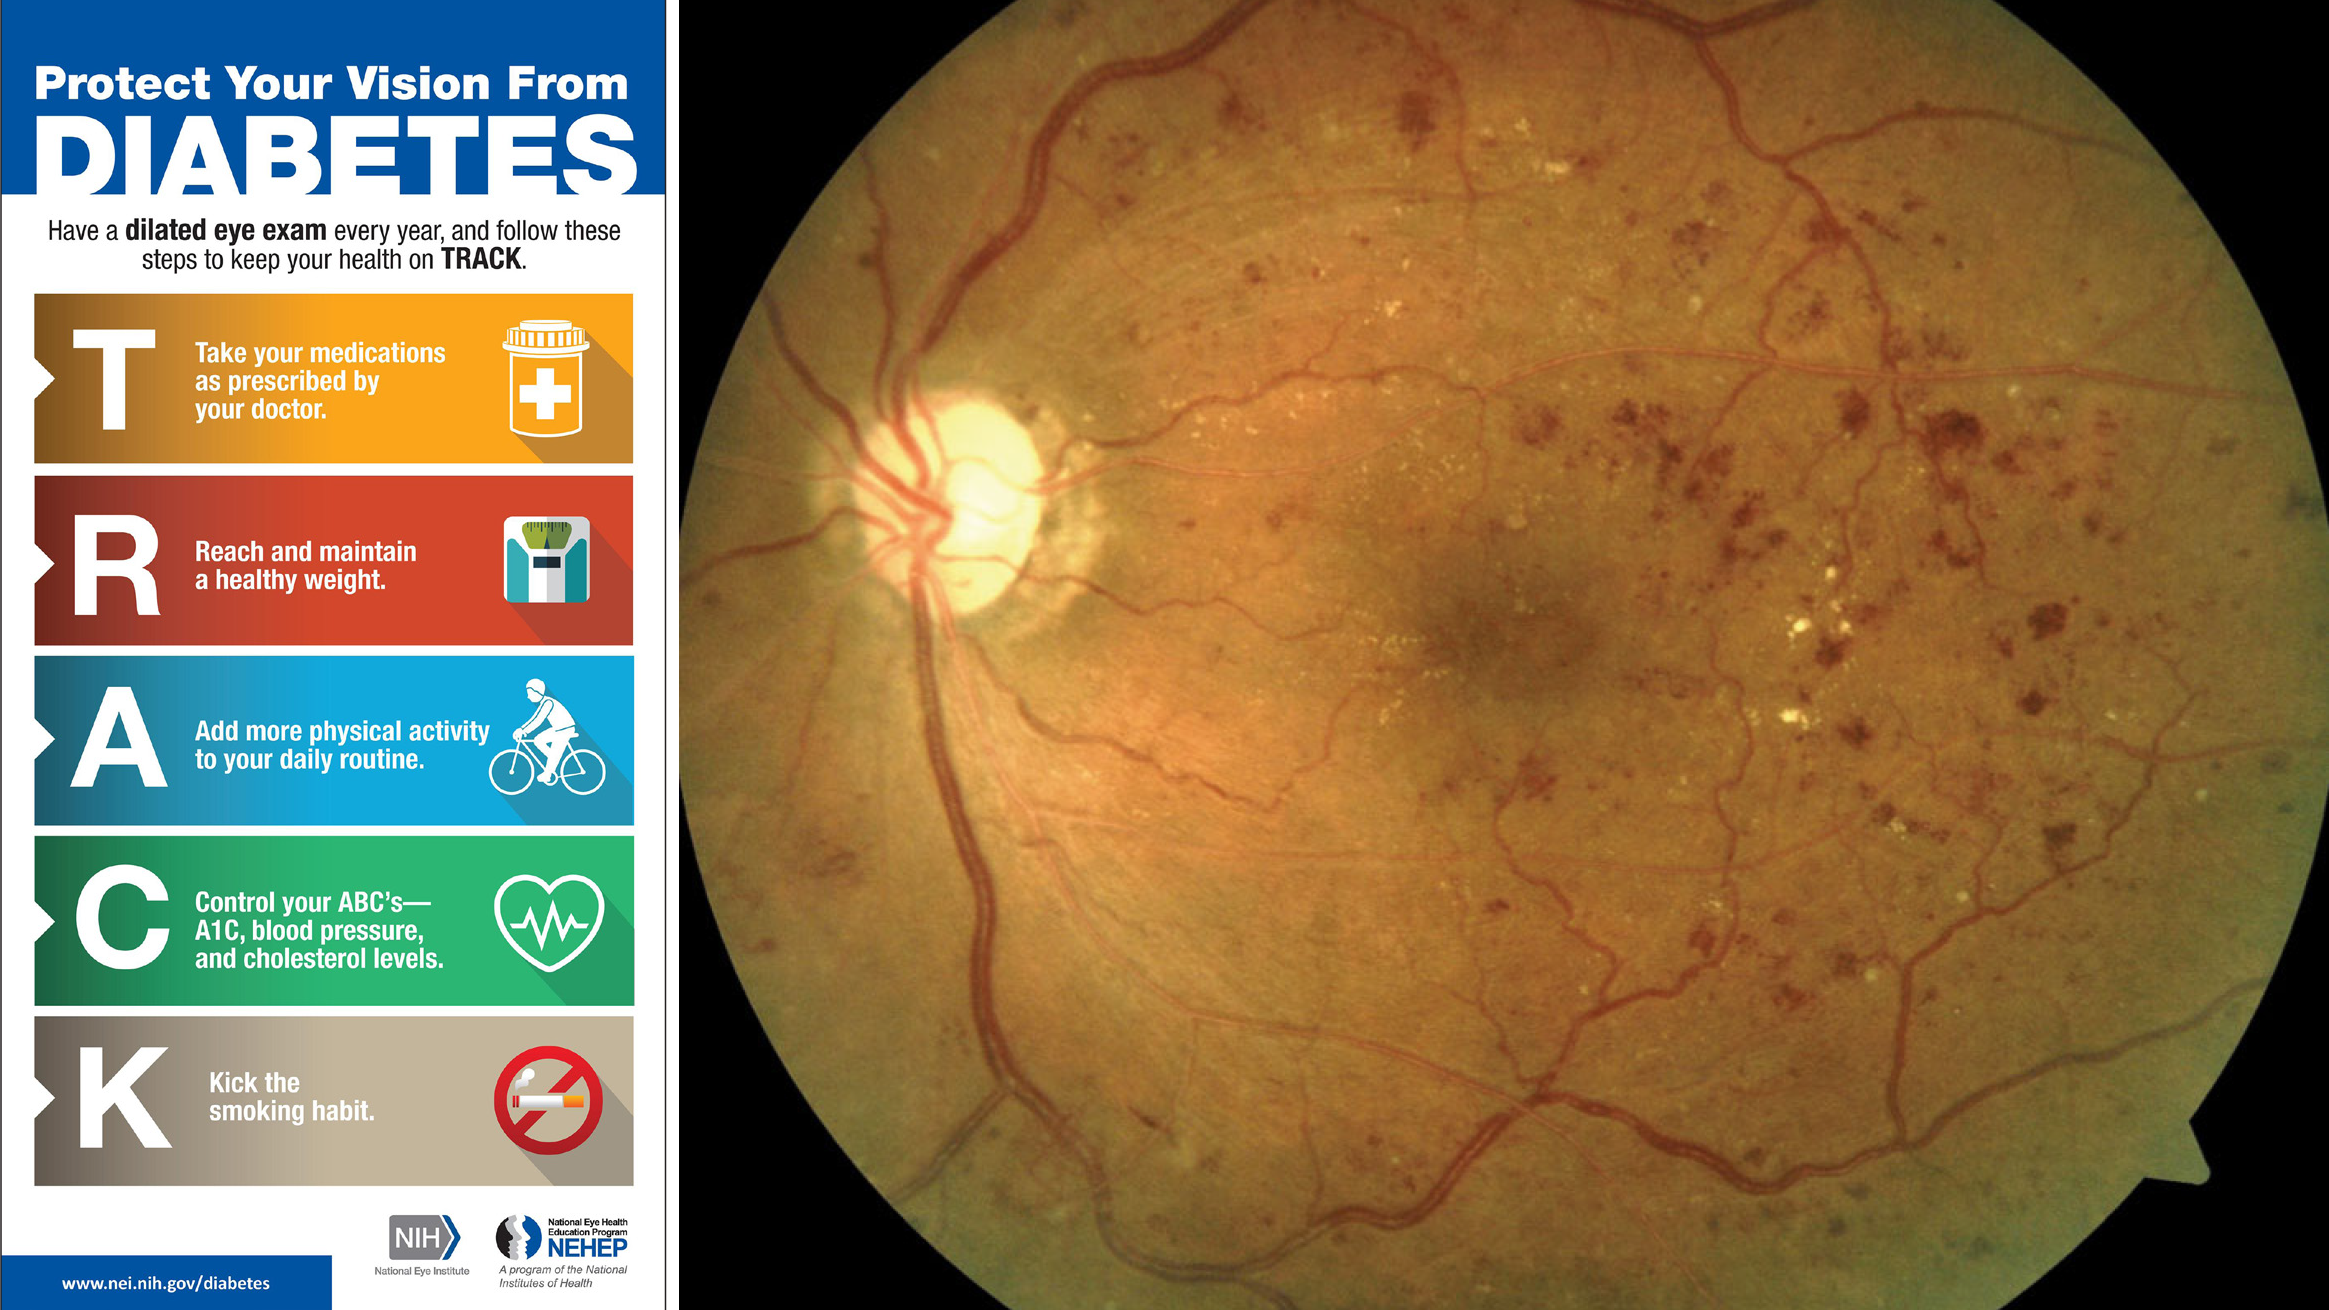 It is crucial that all adults with diabetes have regular diabetic retinopathy surveillance exams to decrease their likelihood of worsening eye health and progression to vision-threatening diabetic retinopathy and/or diabetic macular edema.